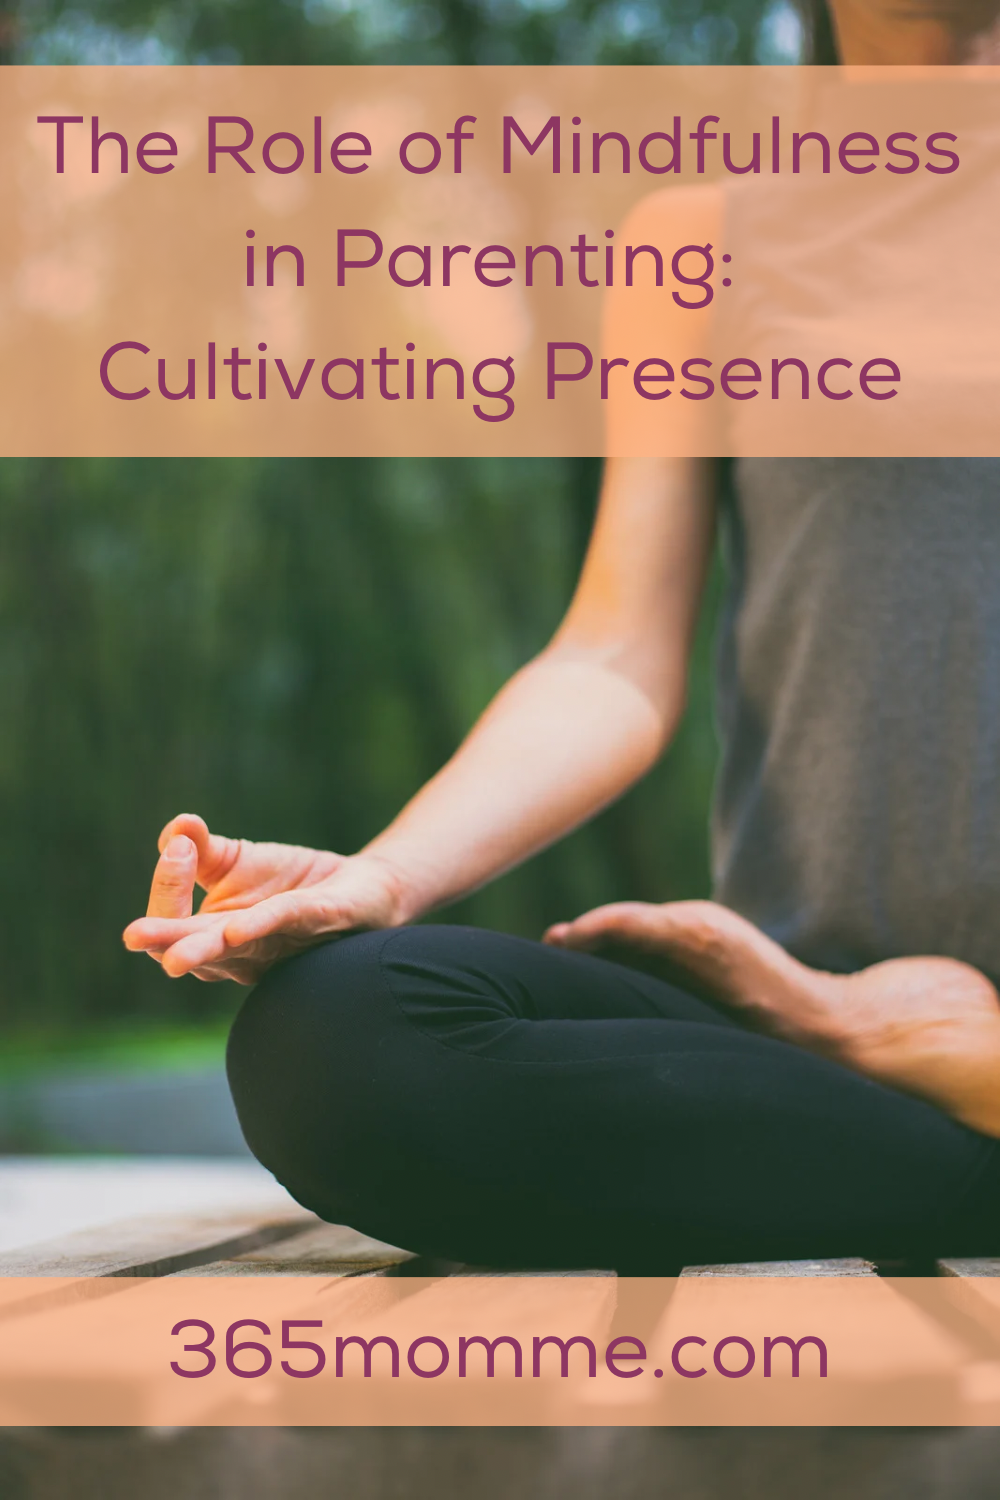 The Role of Mindfulness in Parenting: Cultivating Presence